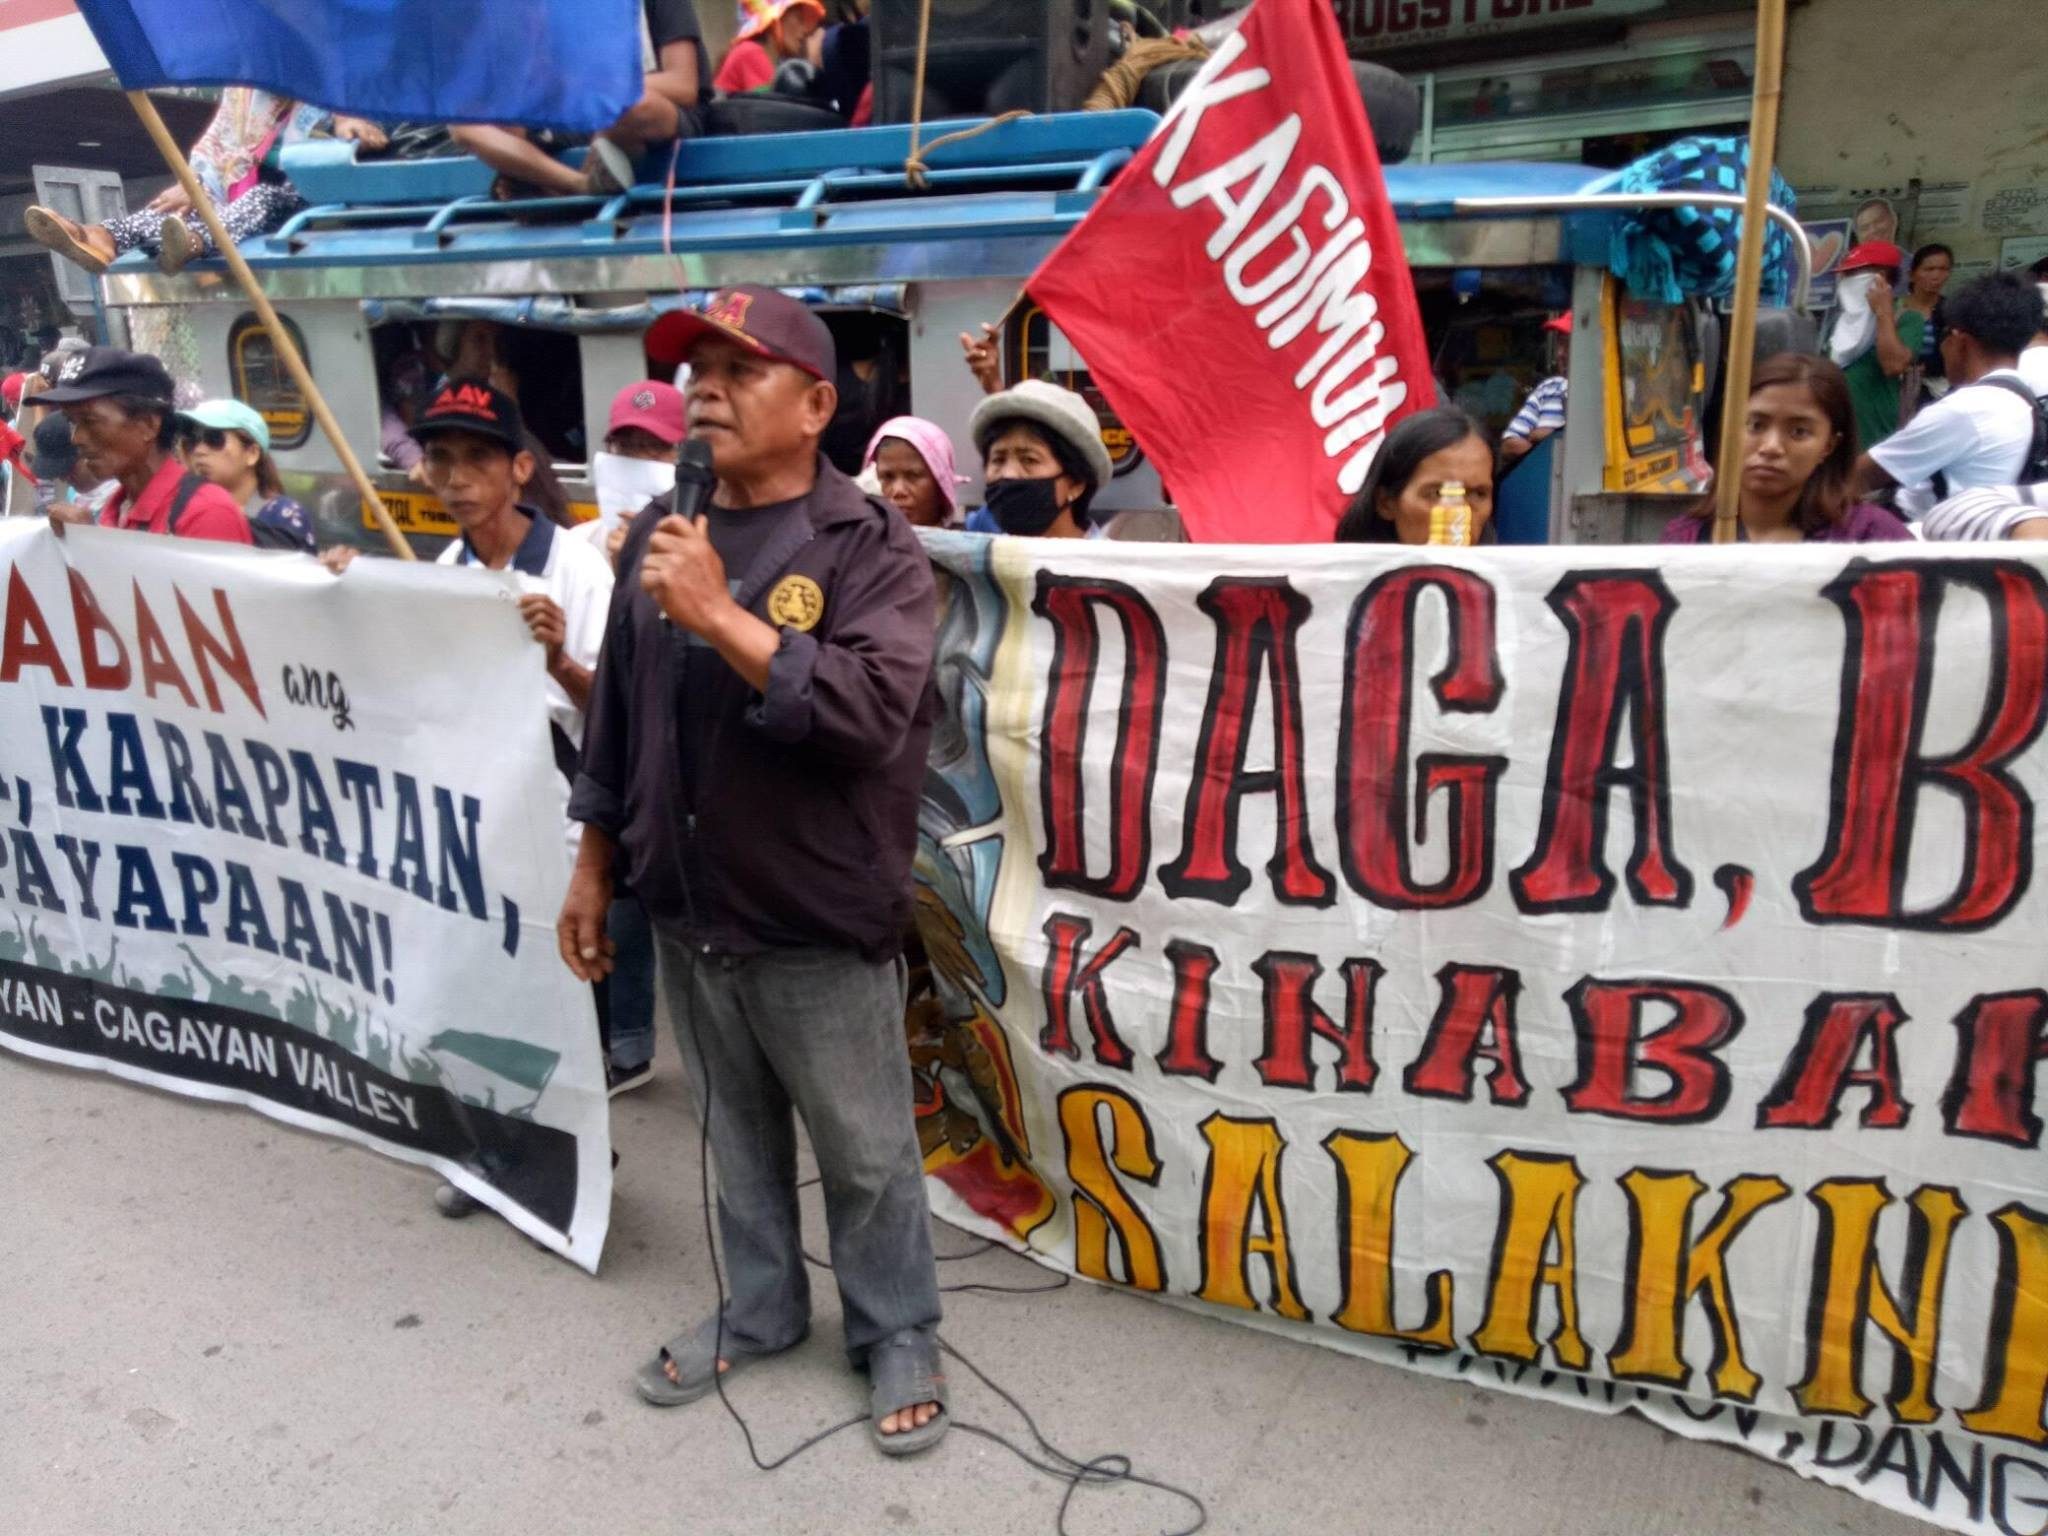 Red-tagged peasant leader arrested in Cagayan